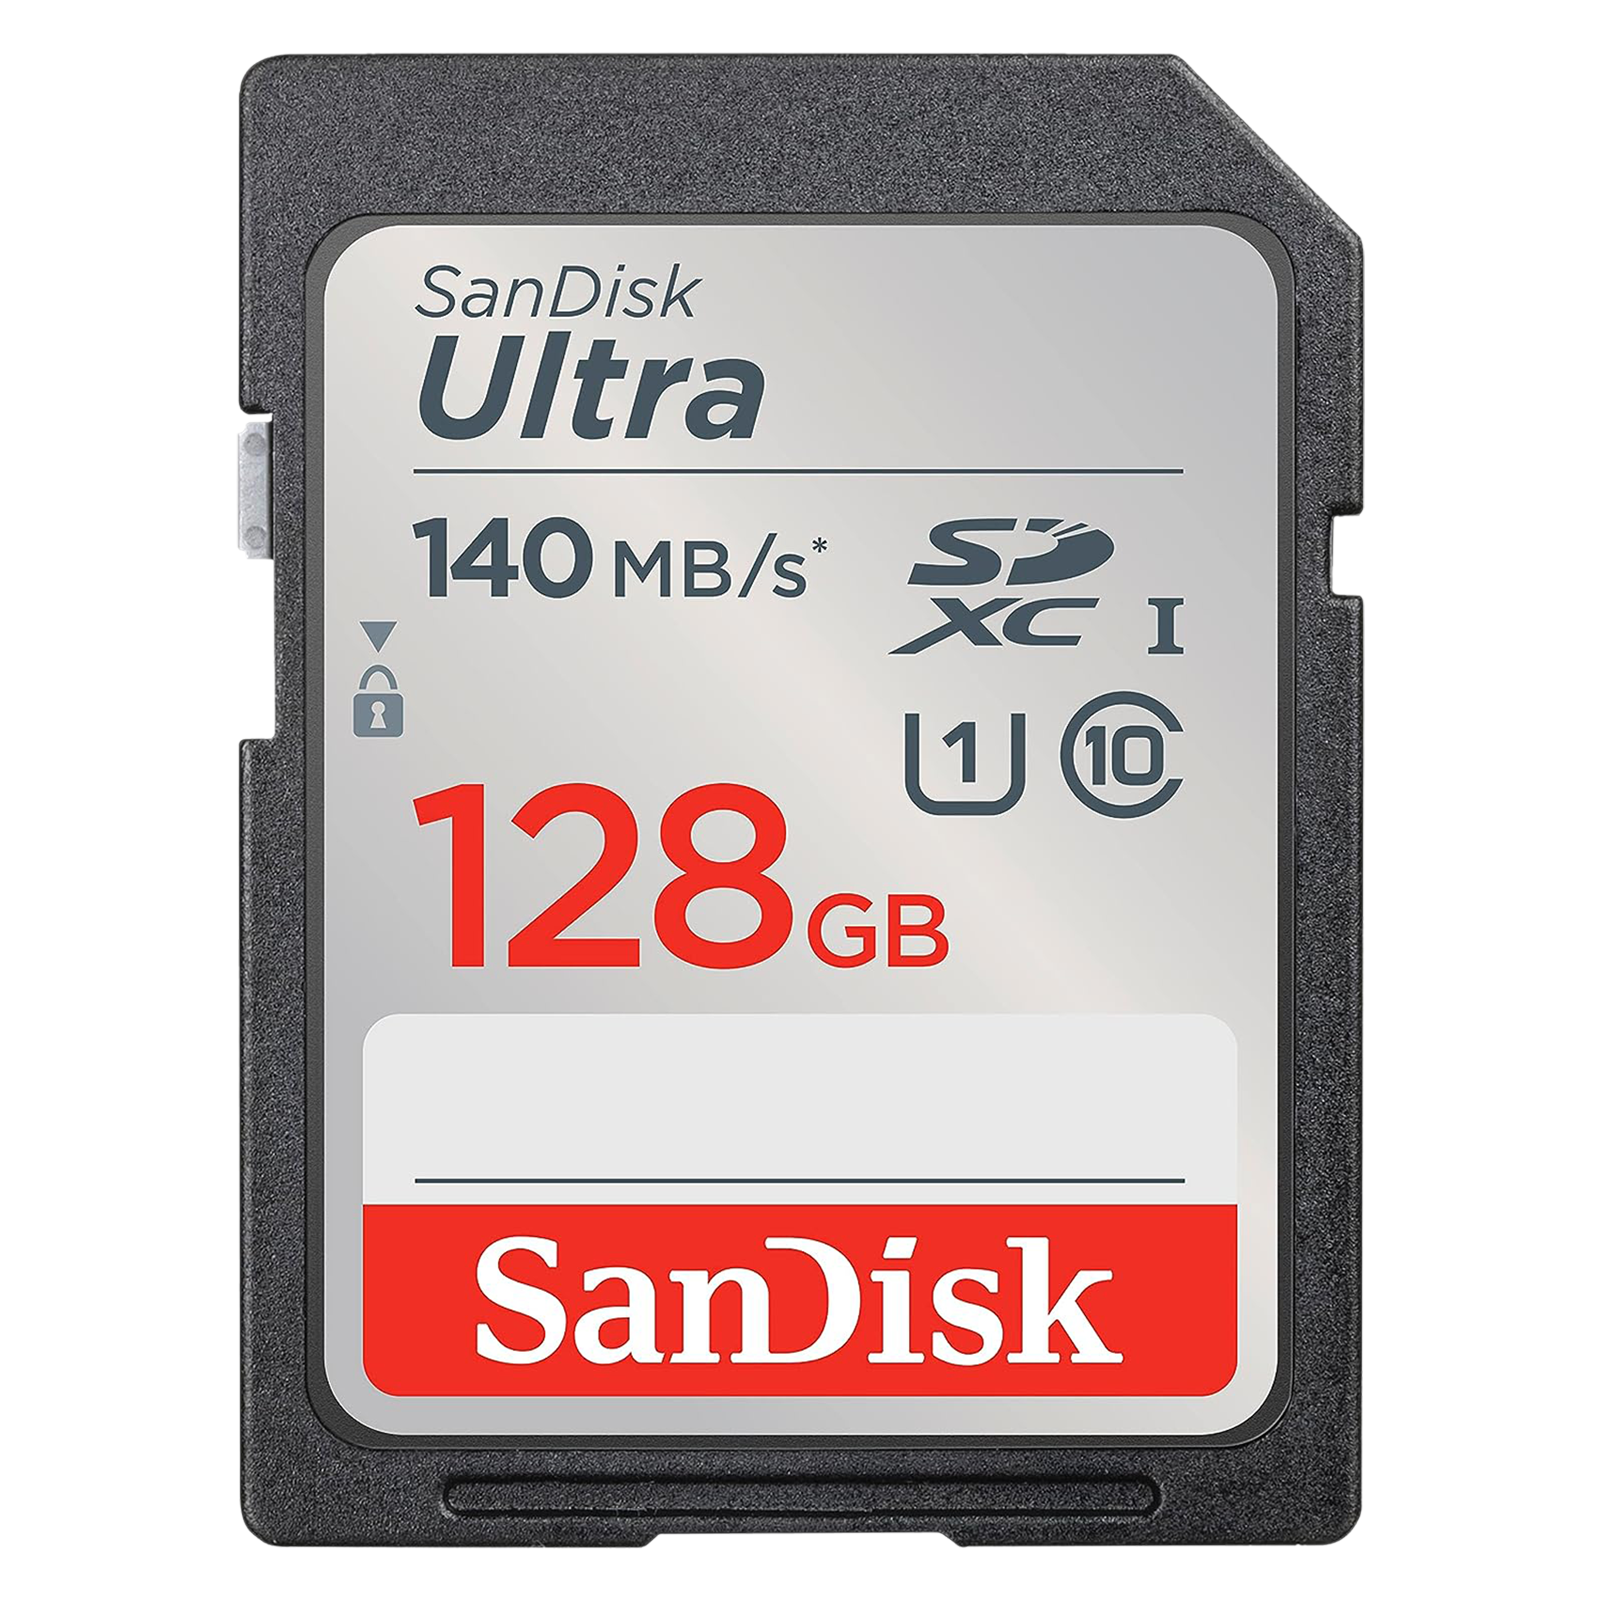 Buy SanDisk Ultra 128GB Class 10 SDXC UHS-I SD Memory Card (140 Mbps Read  Speed, SDSDUNB-128G-GN6IN, Black) Online - Croma